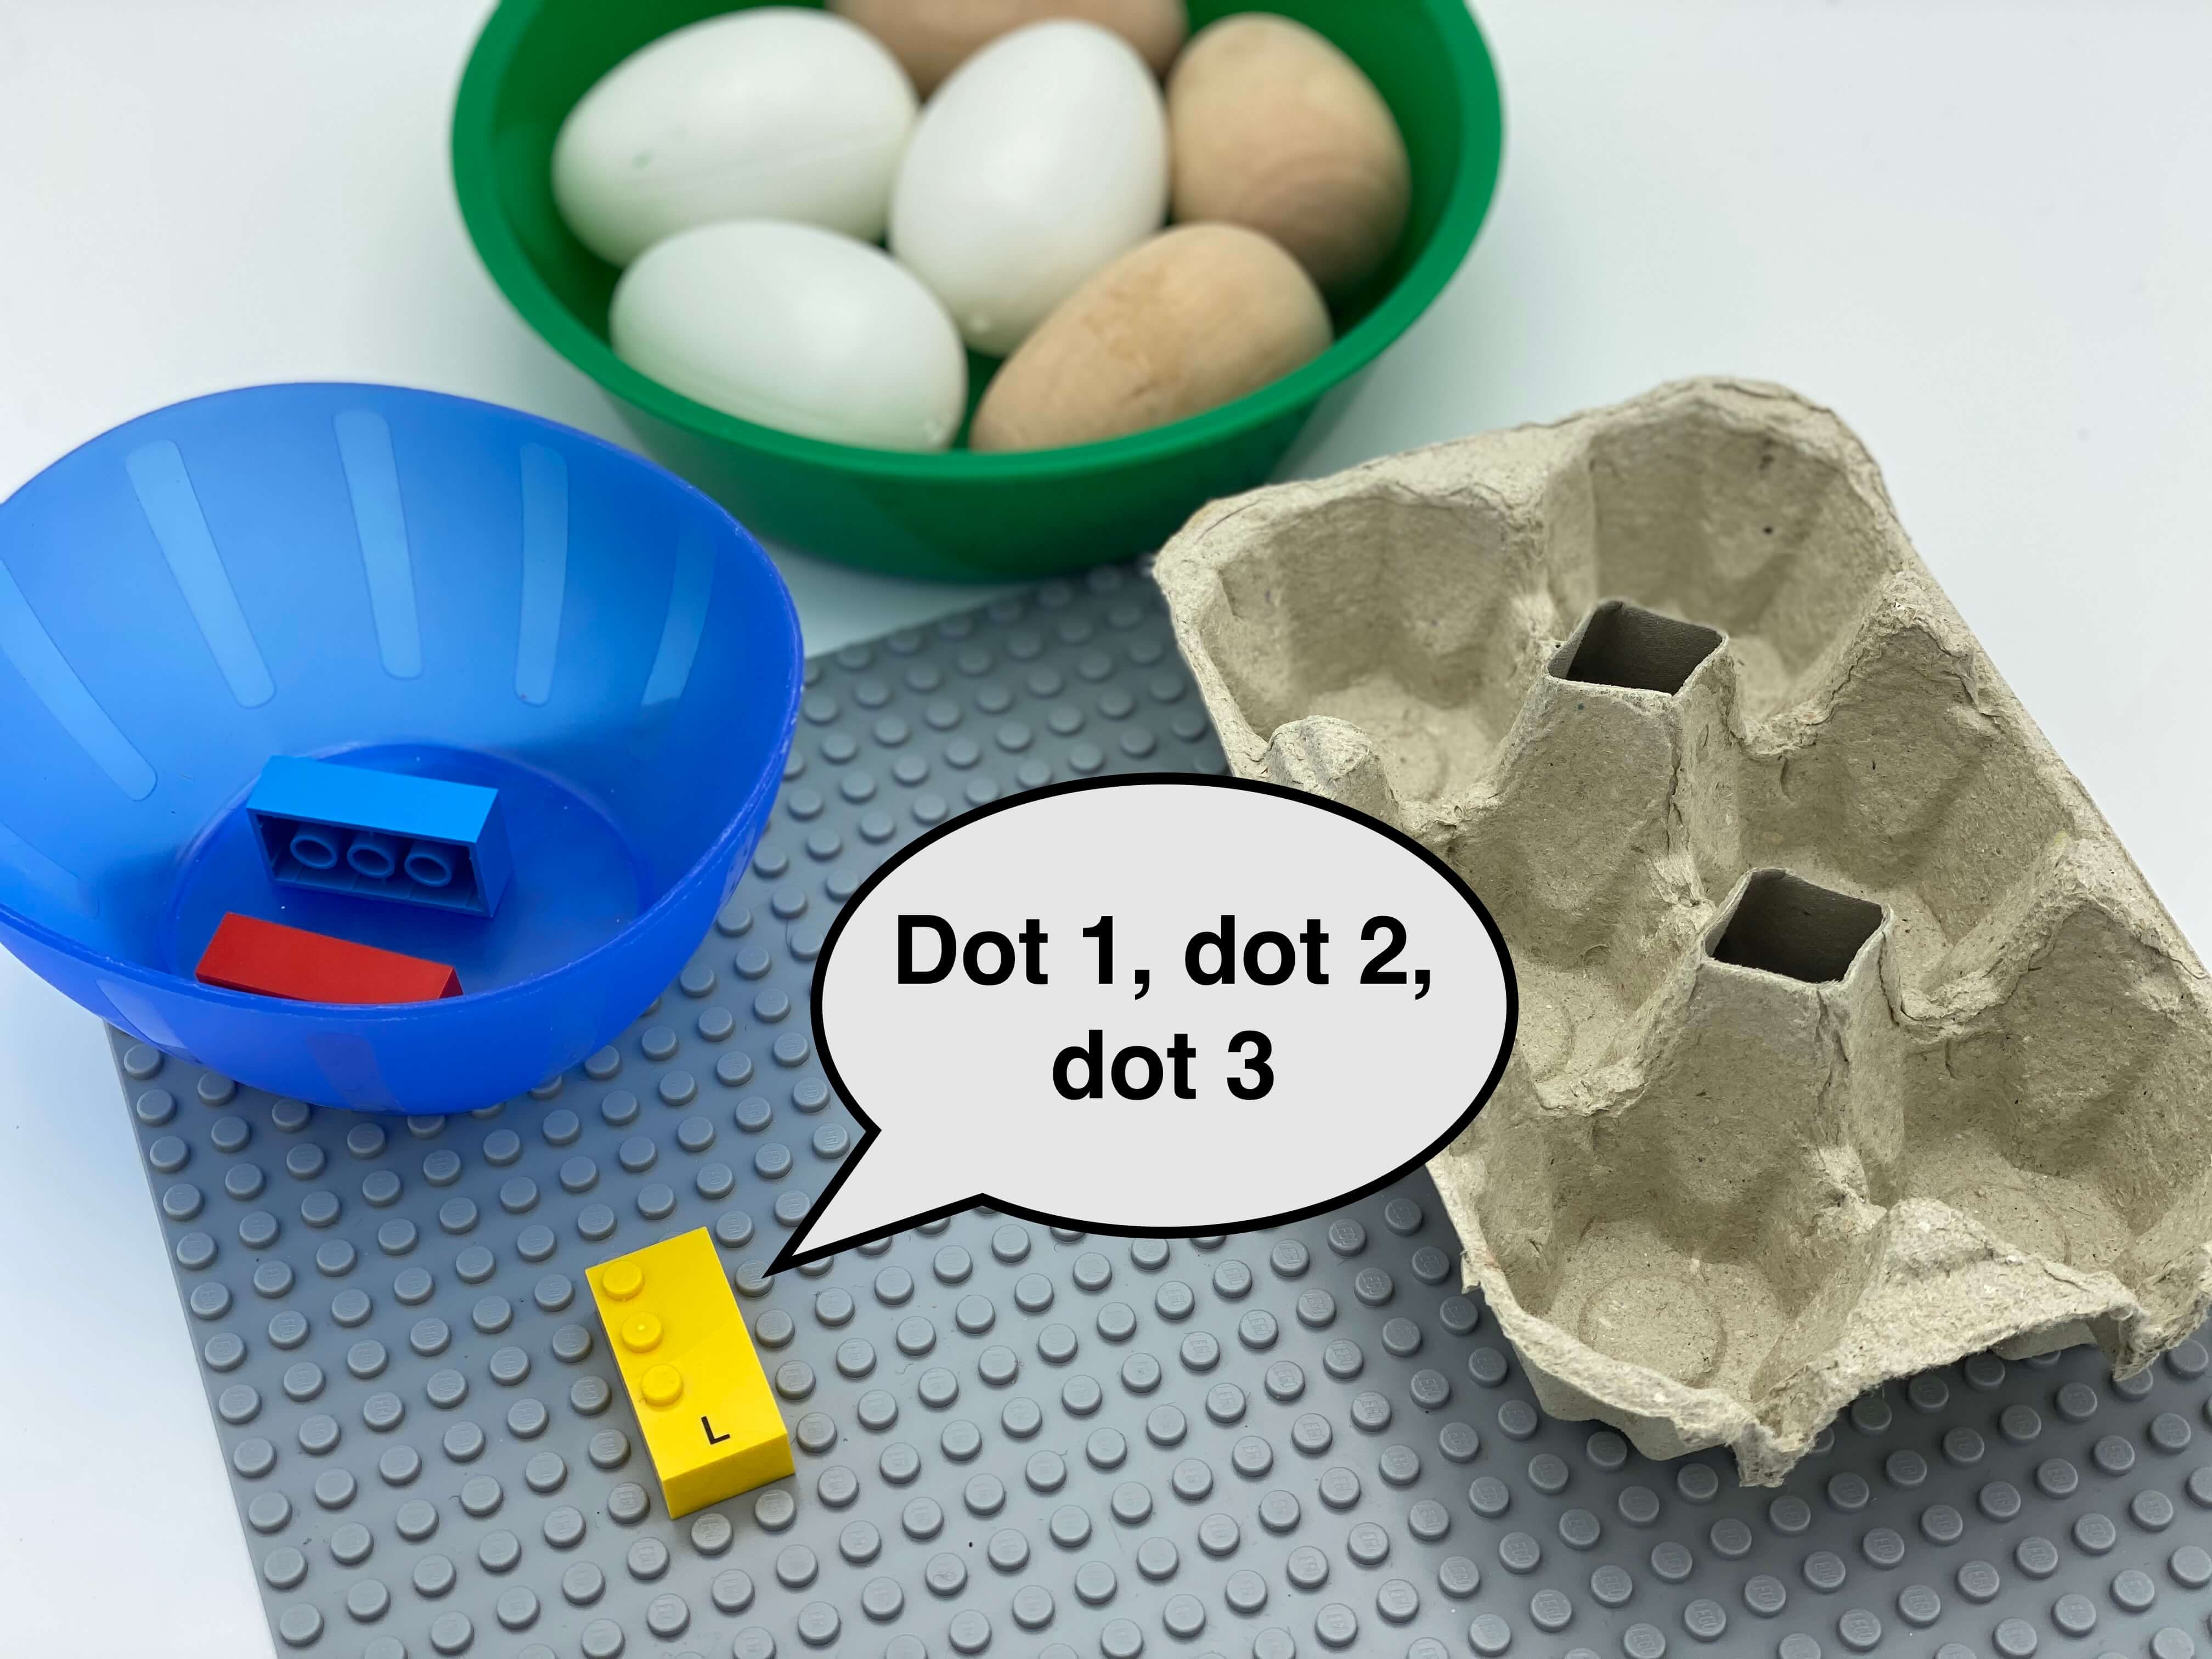 Letter brick l on the base plate which says "dot 1, dot 2, dot 3", a bowl with bricks, a bowl with eggs, an empty egg carton.